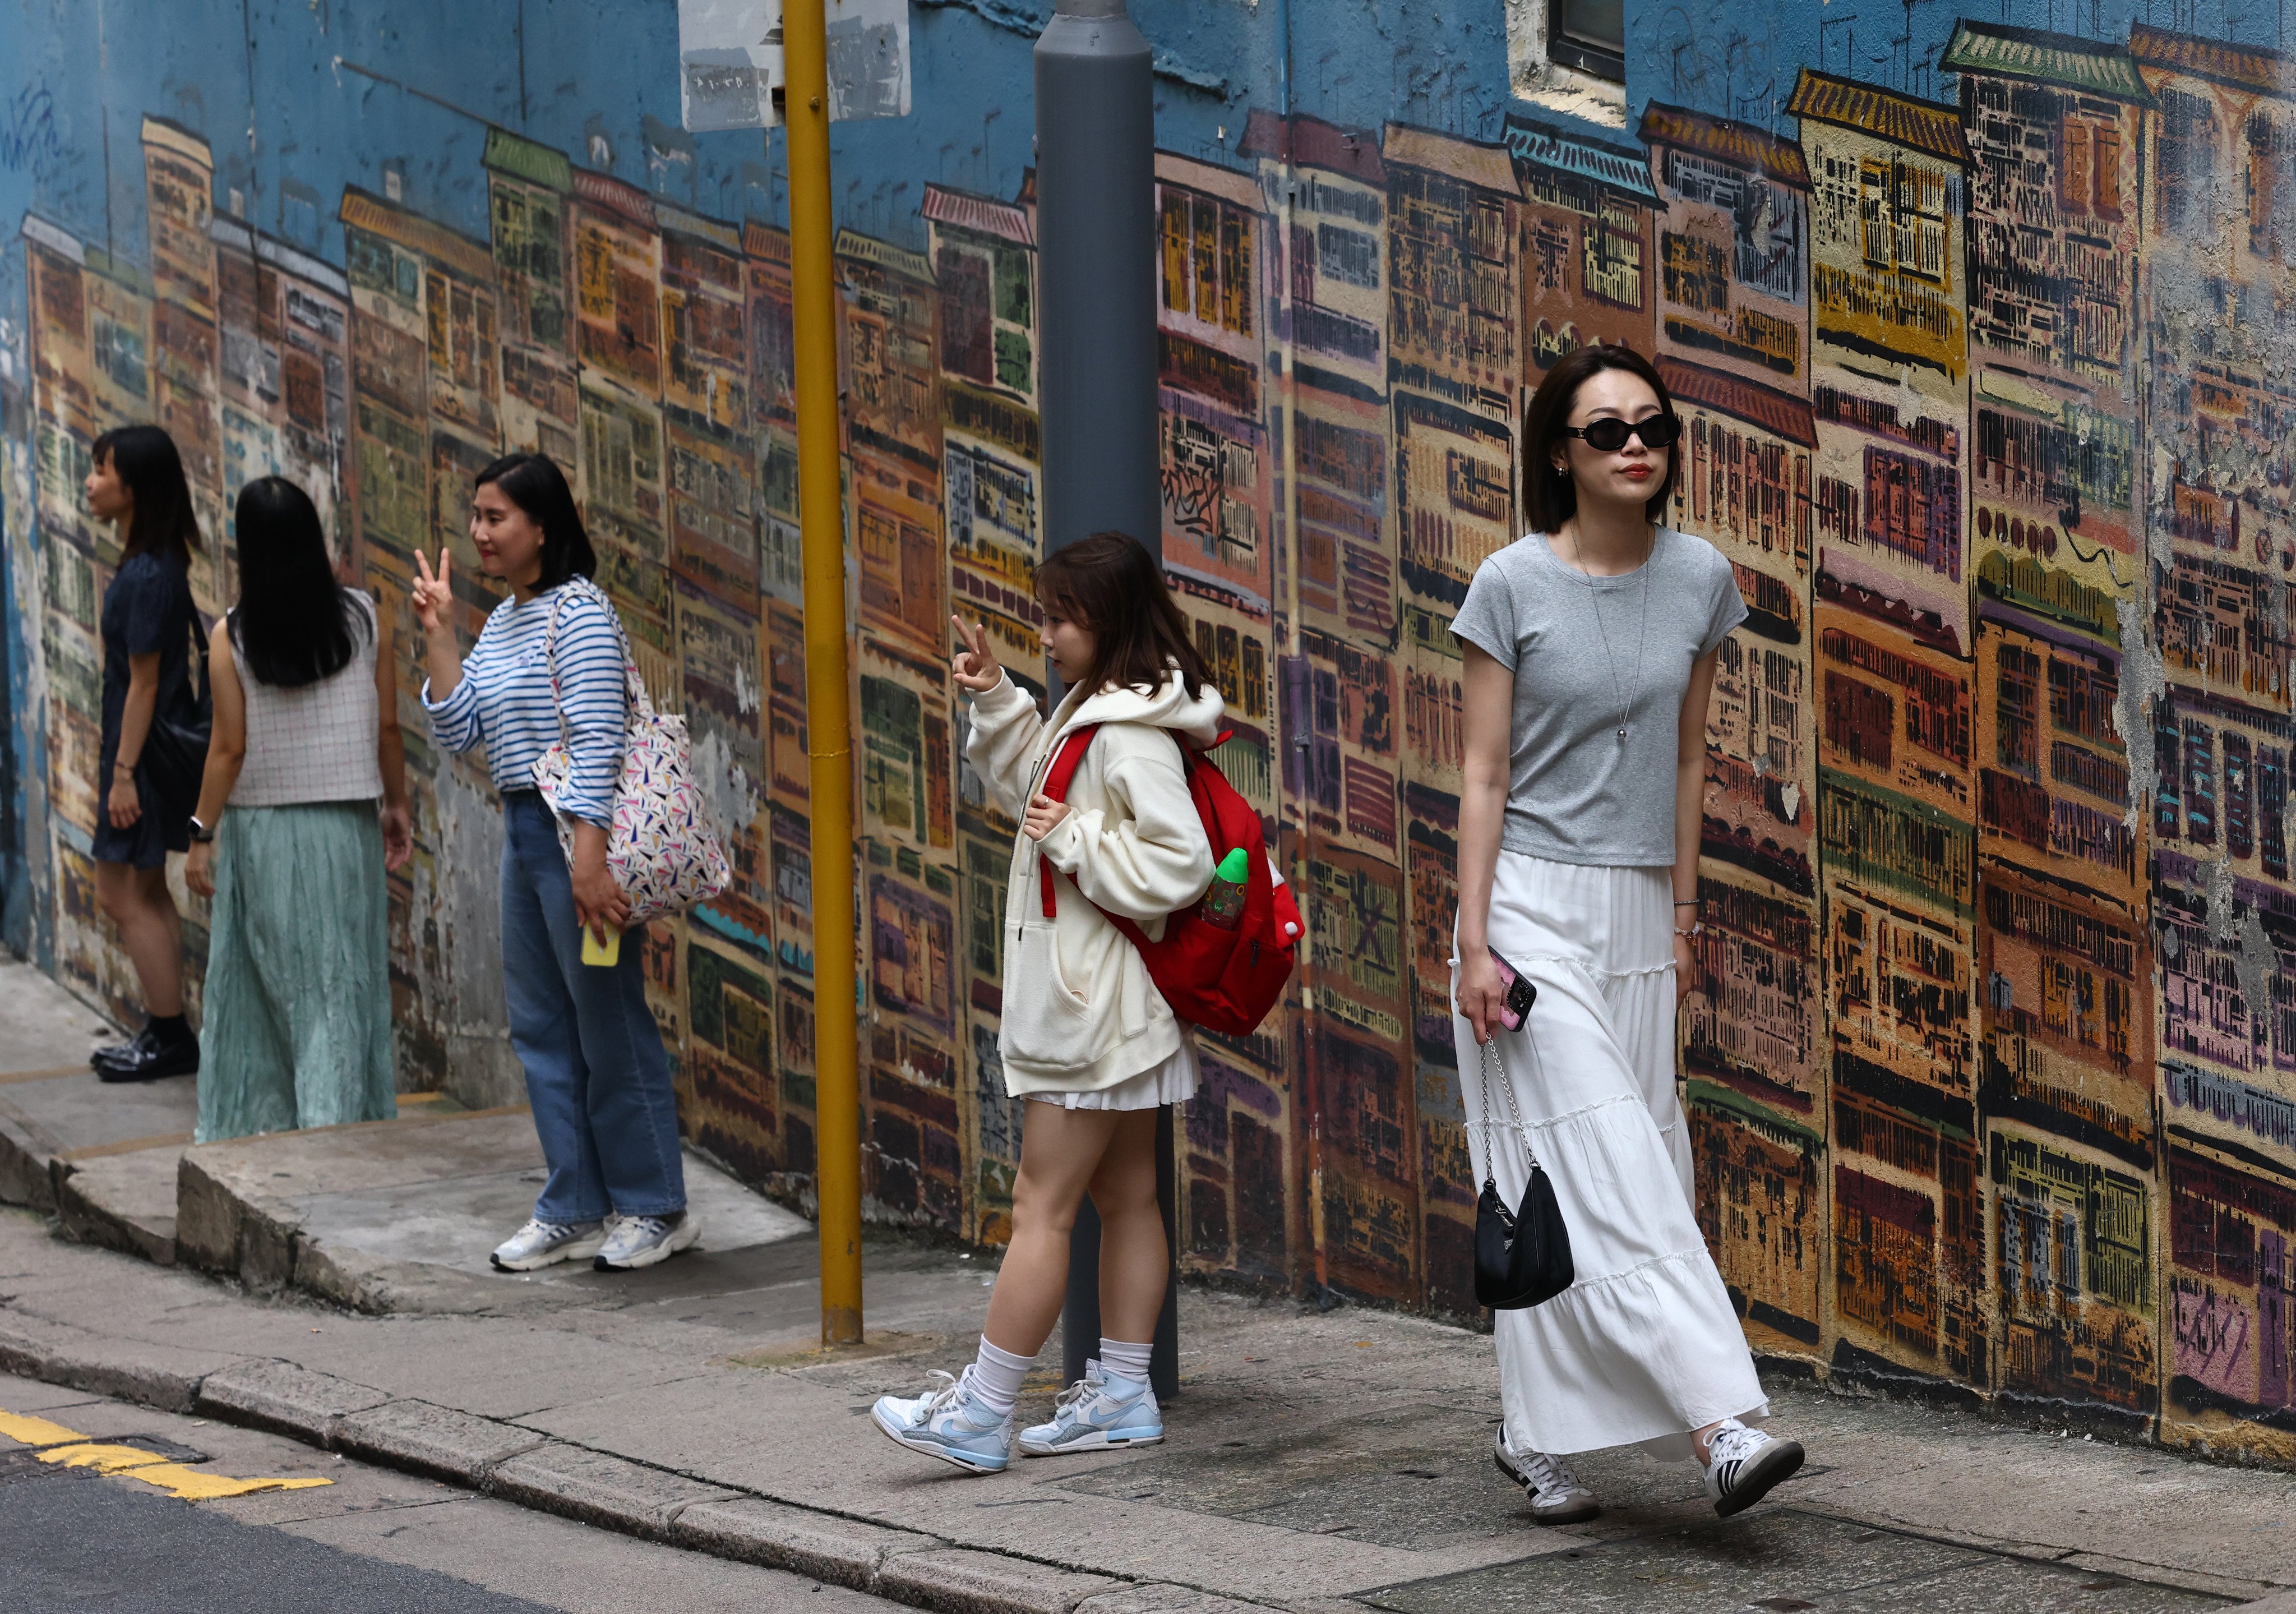 Tourists visit Central during the Labour Day holiday. Hong Kong welcomed a daily average of about 187,375 mainland tourists between May 1 and 3. Photo: Dickson Lee